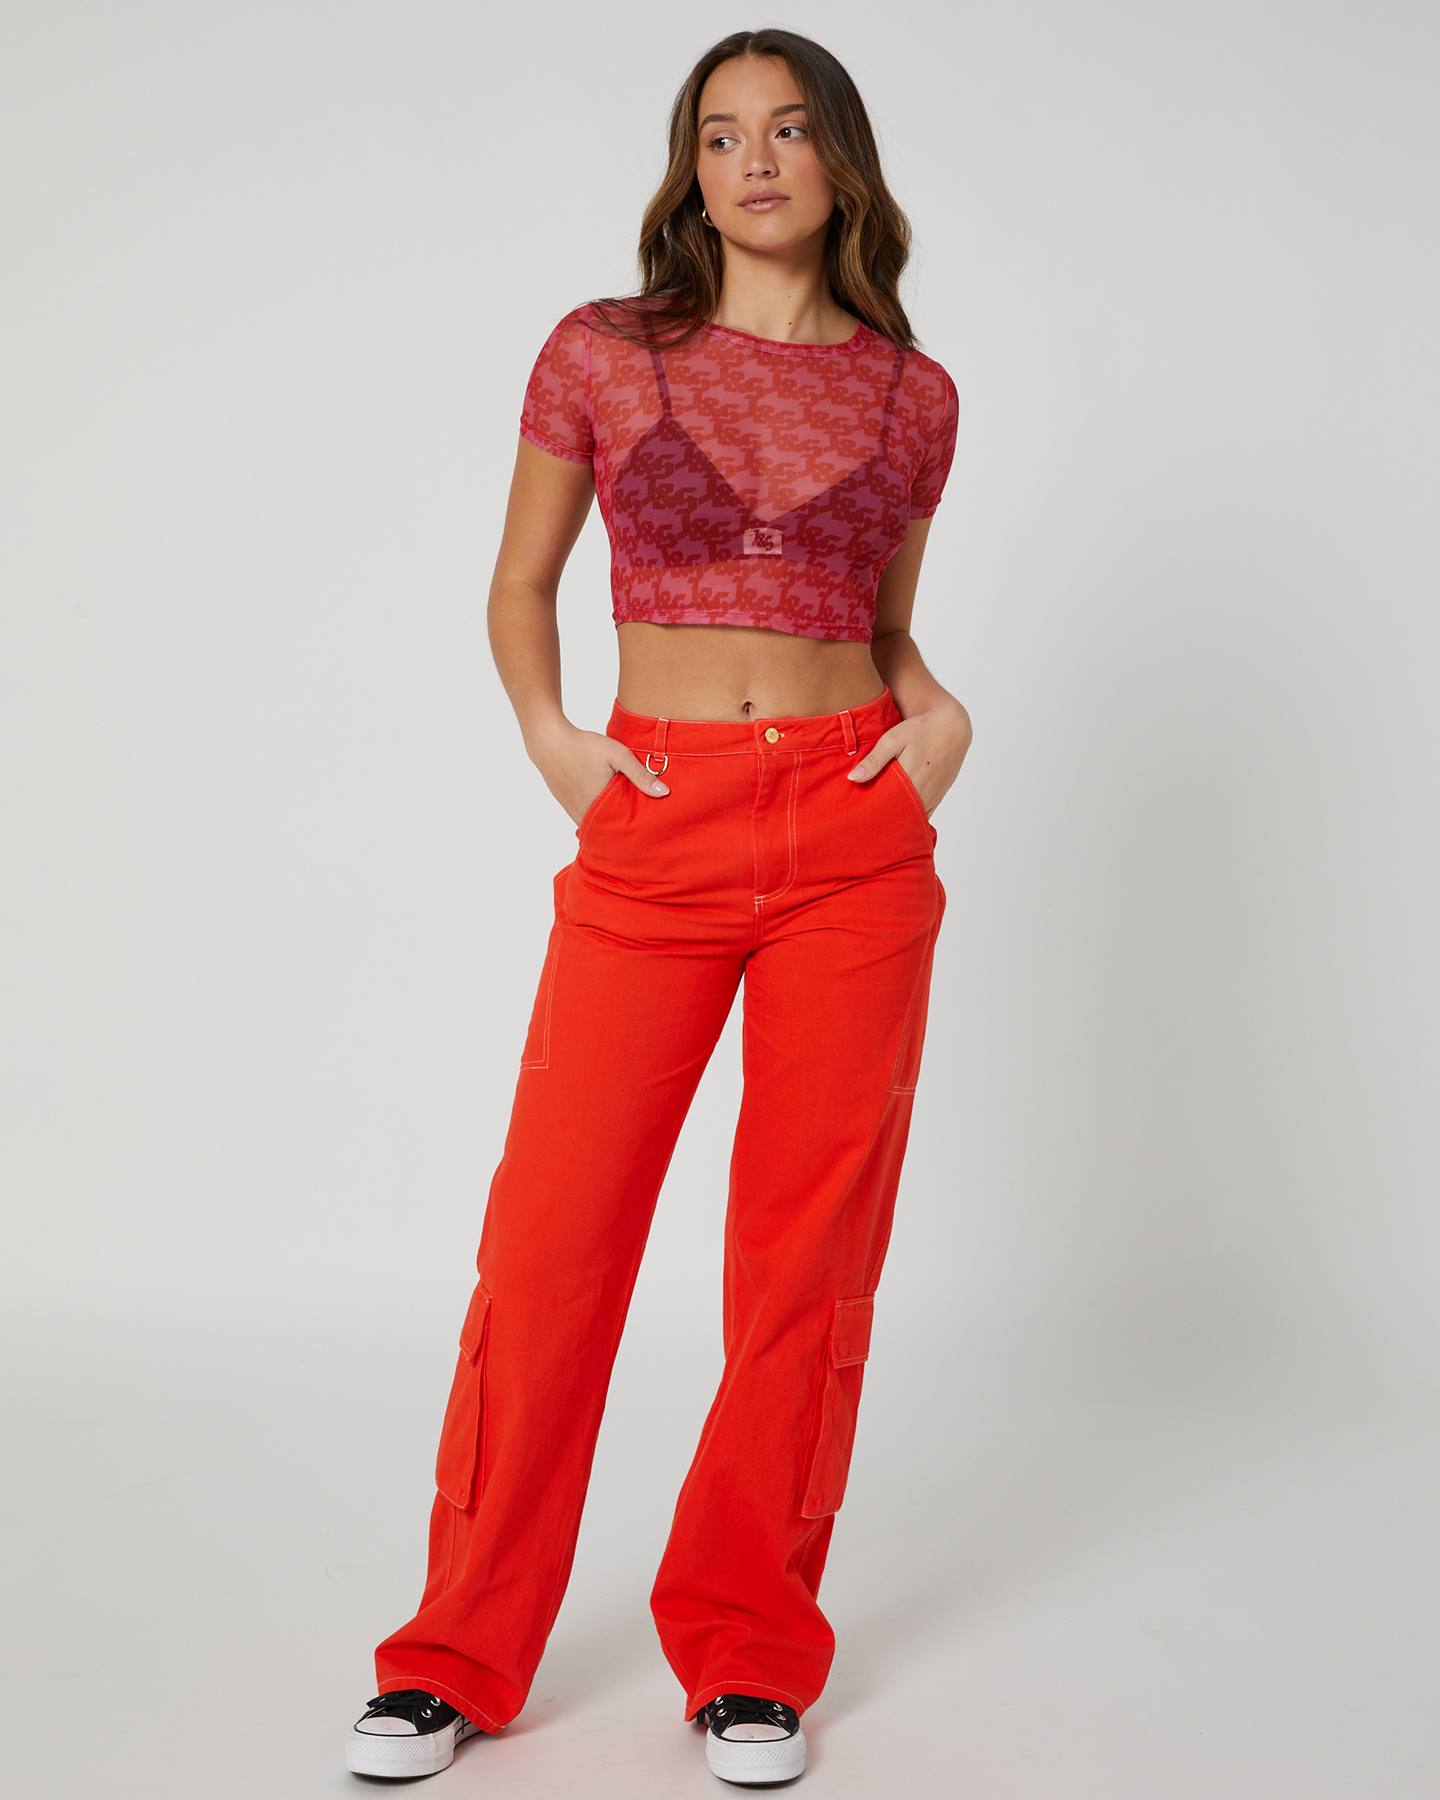 https://www.surfstitch.com/on/demandware.static/-/Sites-ss-master-catalog/default/dw62f55d28/images/JSG013-3RED/RED-WOMENS-CLOTHING-JGR-AND-STN-PANTS-JSG013-3RED_5.JPG